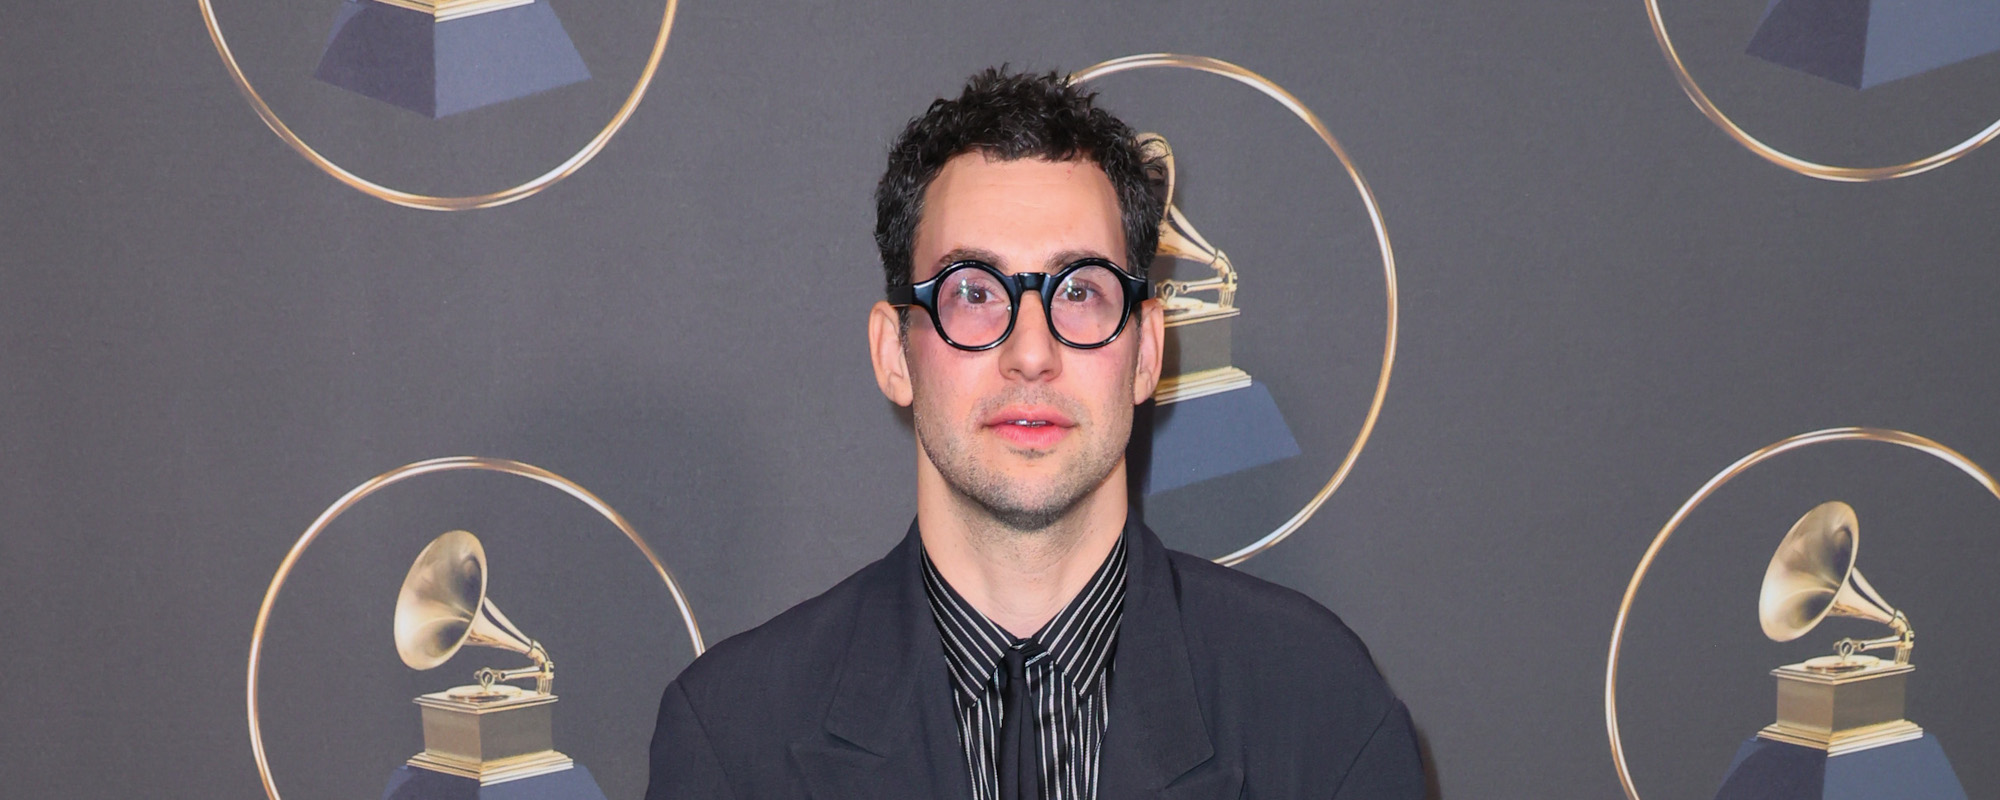 Jack Antonoff at the Grammys: “Why Can’t I Buy a f***ing Ticket at the Price That the Artist Wants?”